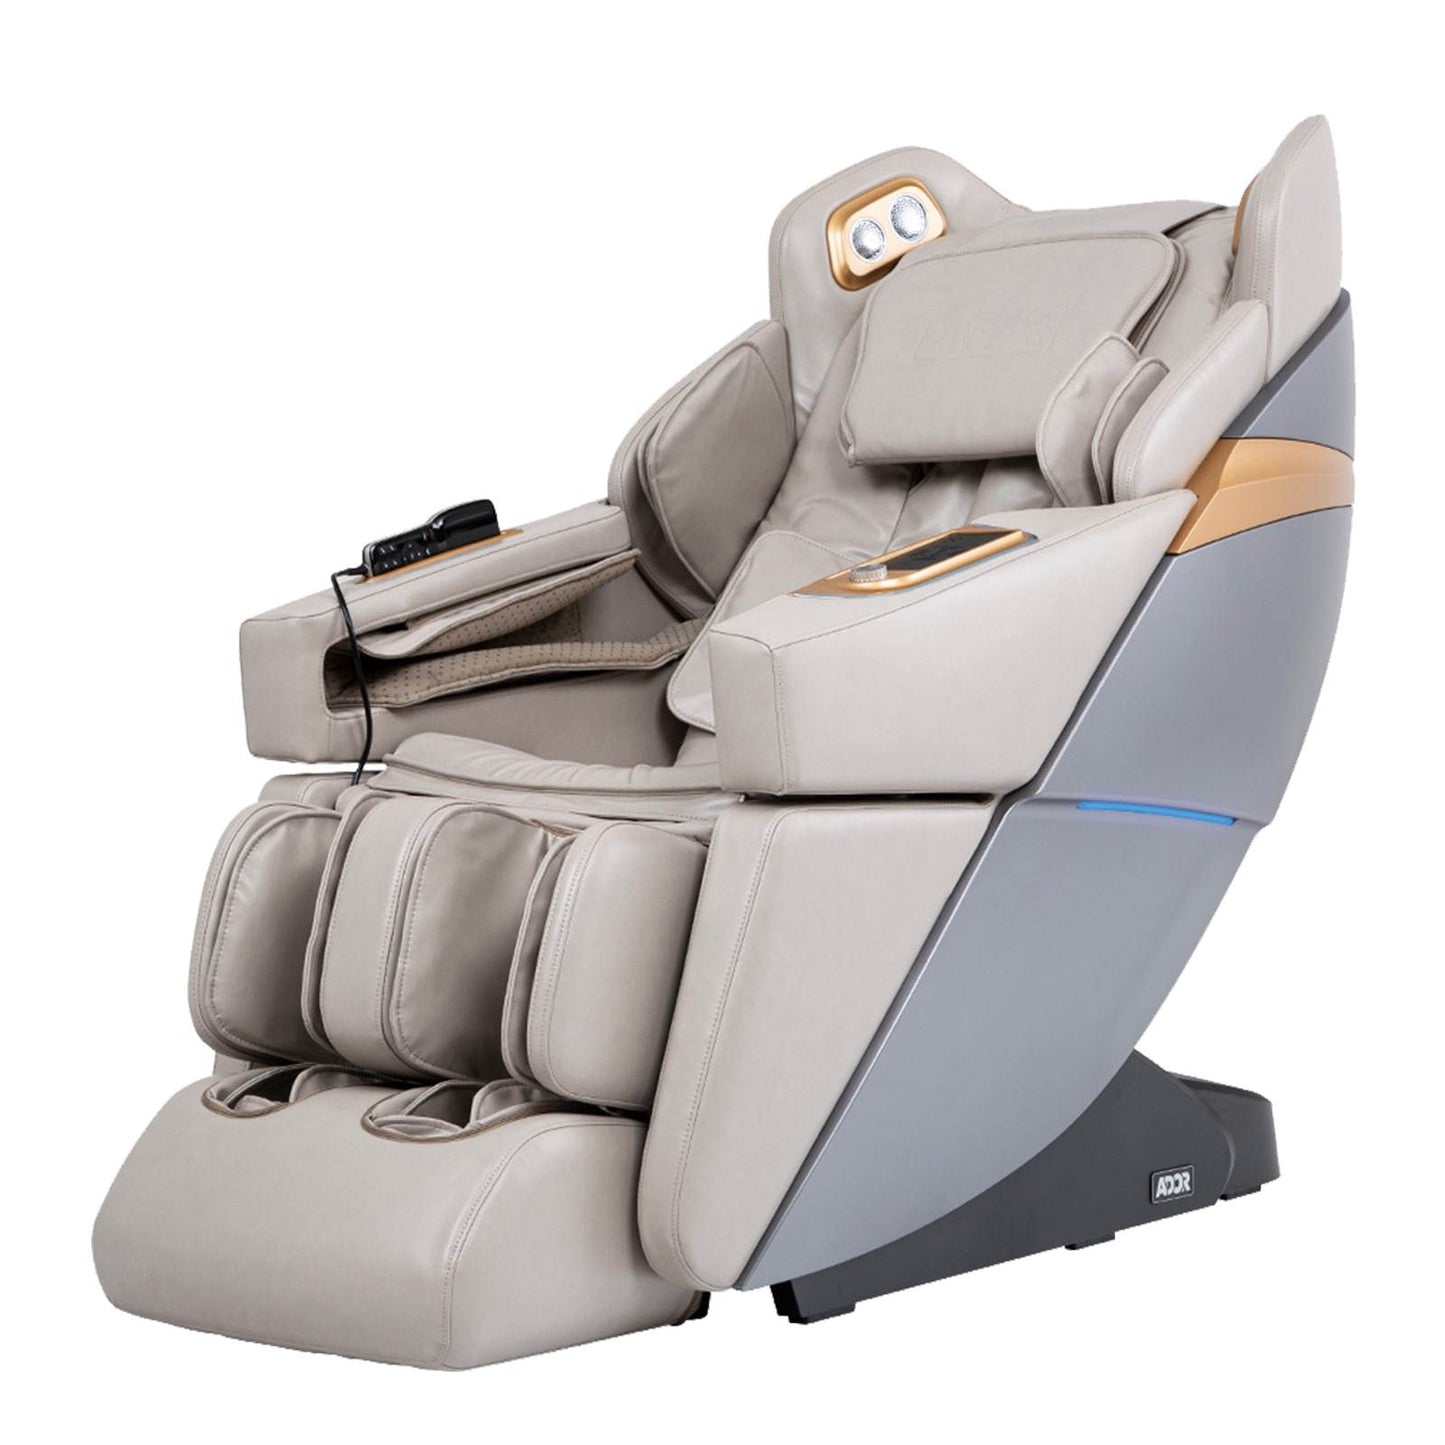 Ador 3D Allure Taupe / Curbside Delivery - Free / 1 Year(Parts/Labor) 2&3 Year(Parts Only) - Free titan-chair